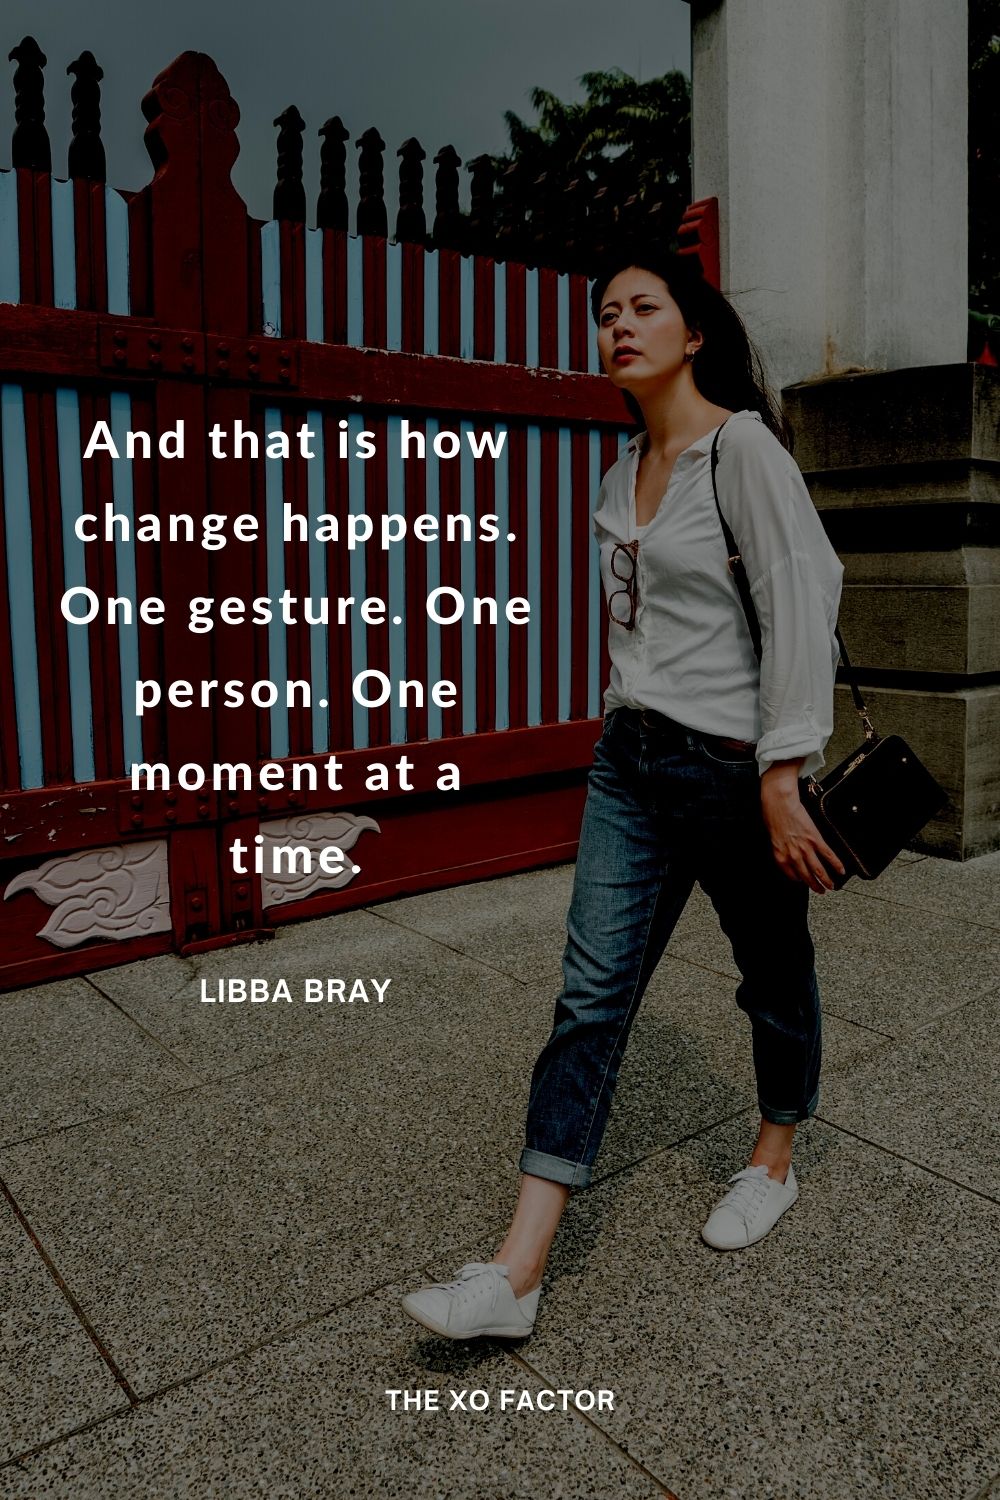 And that is how change happens. One gesture. One person. One moment at a time. Libba Bray